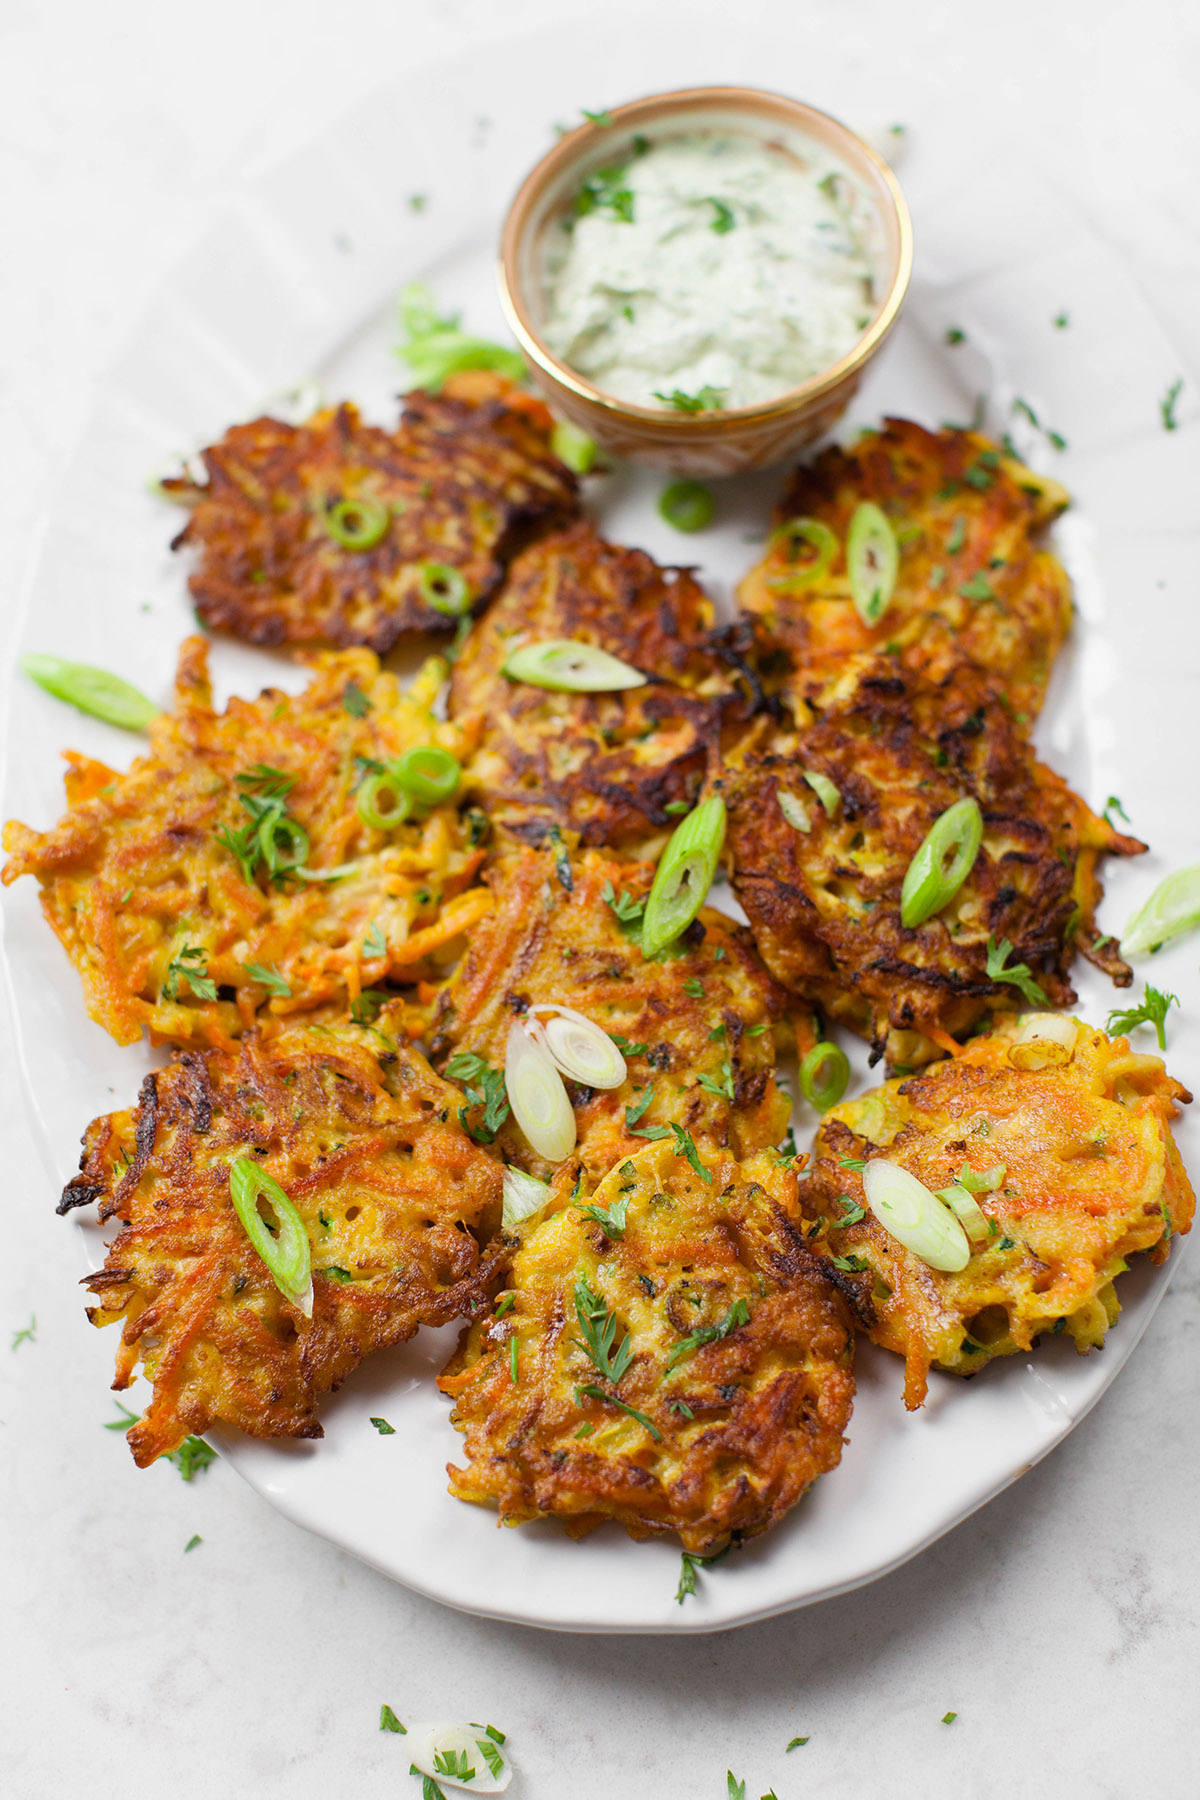 Carrot, Zucchini and Scallion Fritters